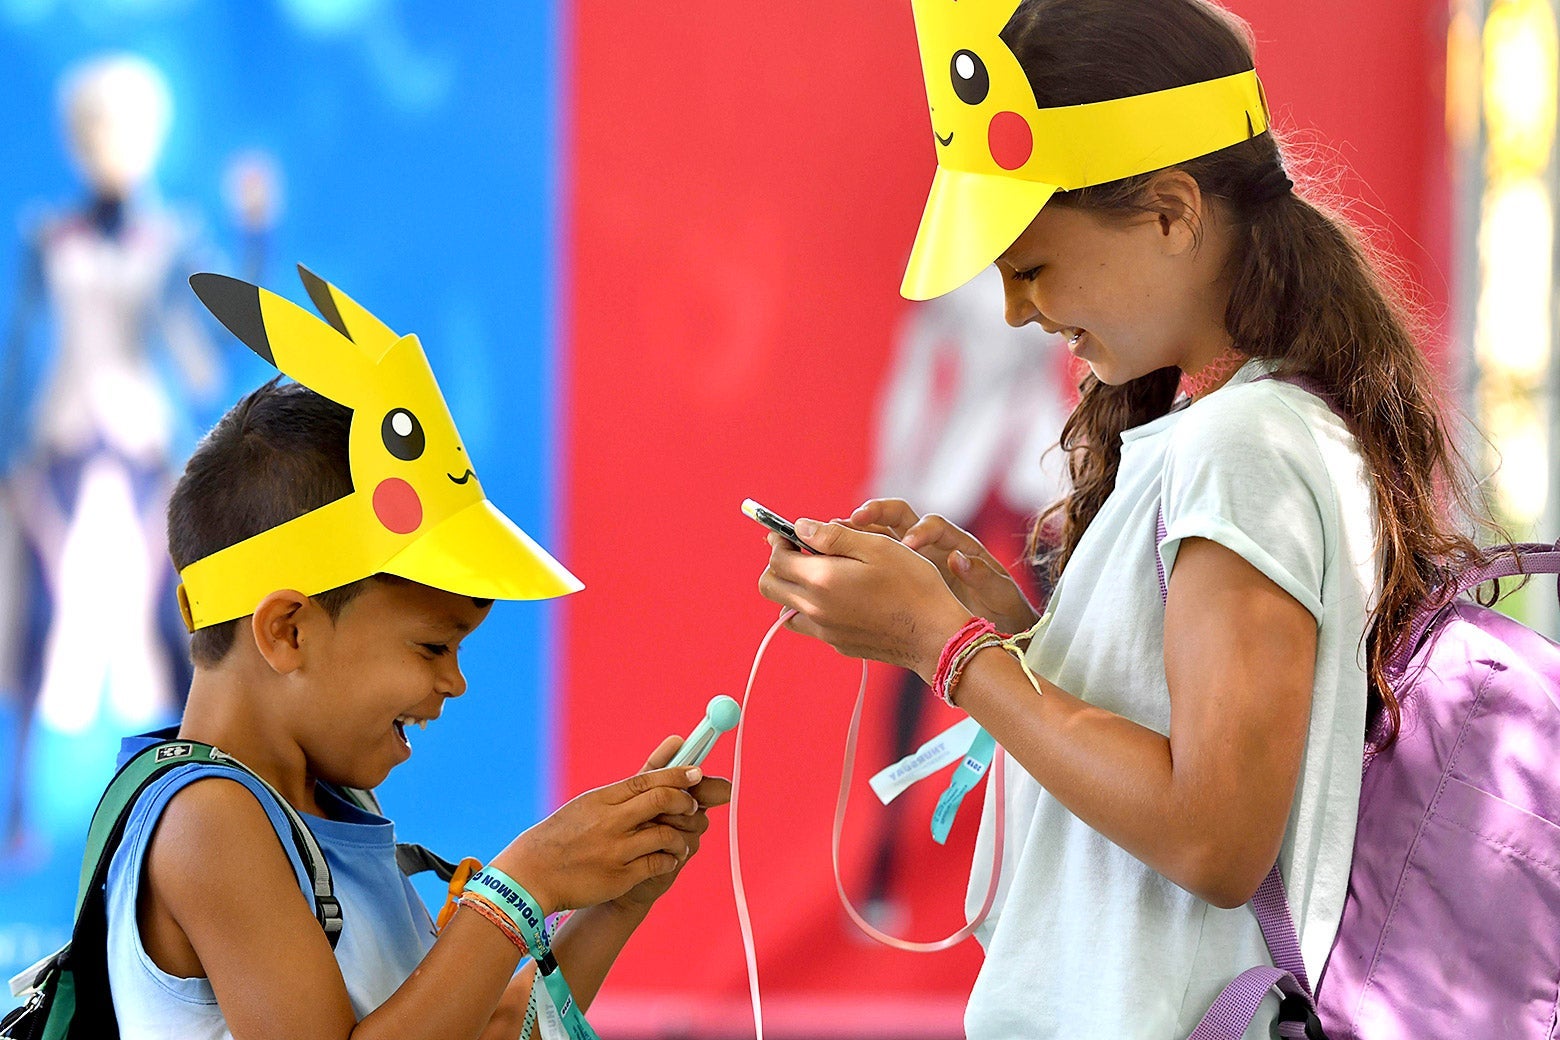 Switzerland's Leo, 9, and his sister Lea, 10, look at their phones during the Pokemon Go Festival on July 4, 2019 at the Westfalenpark in Dortmund, western Germany.